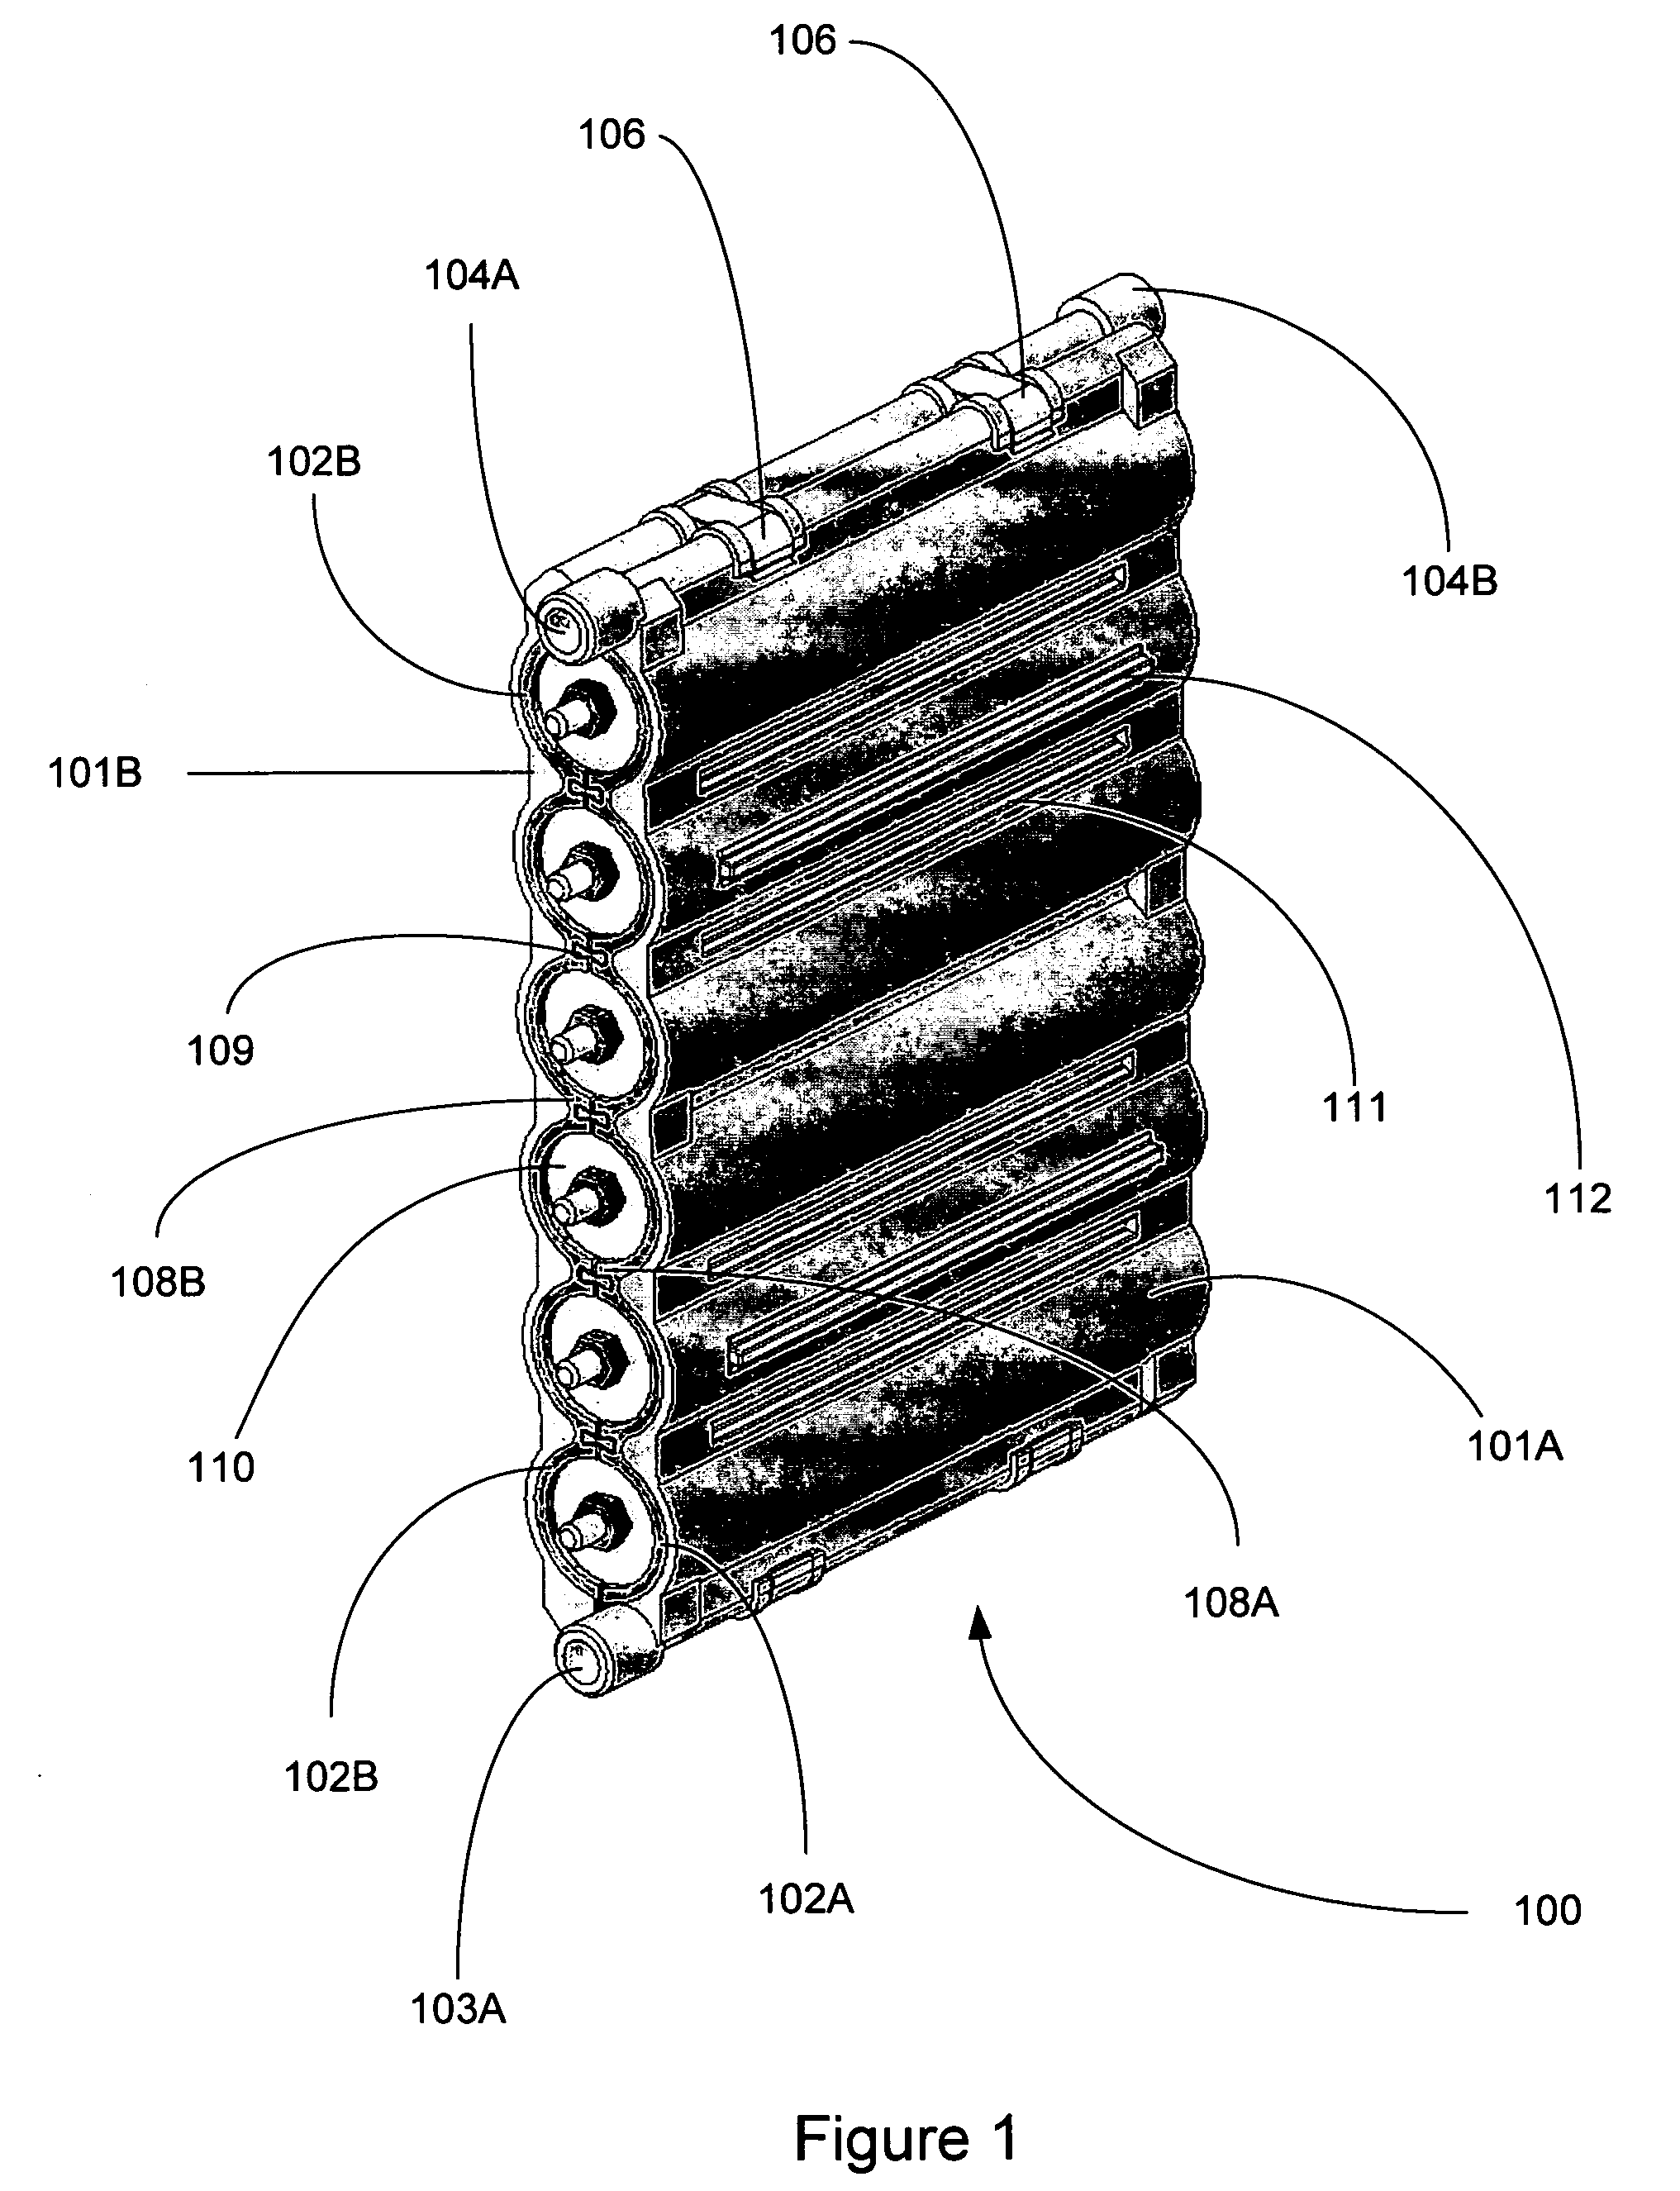 Device for housing electrochemical cells